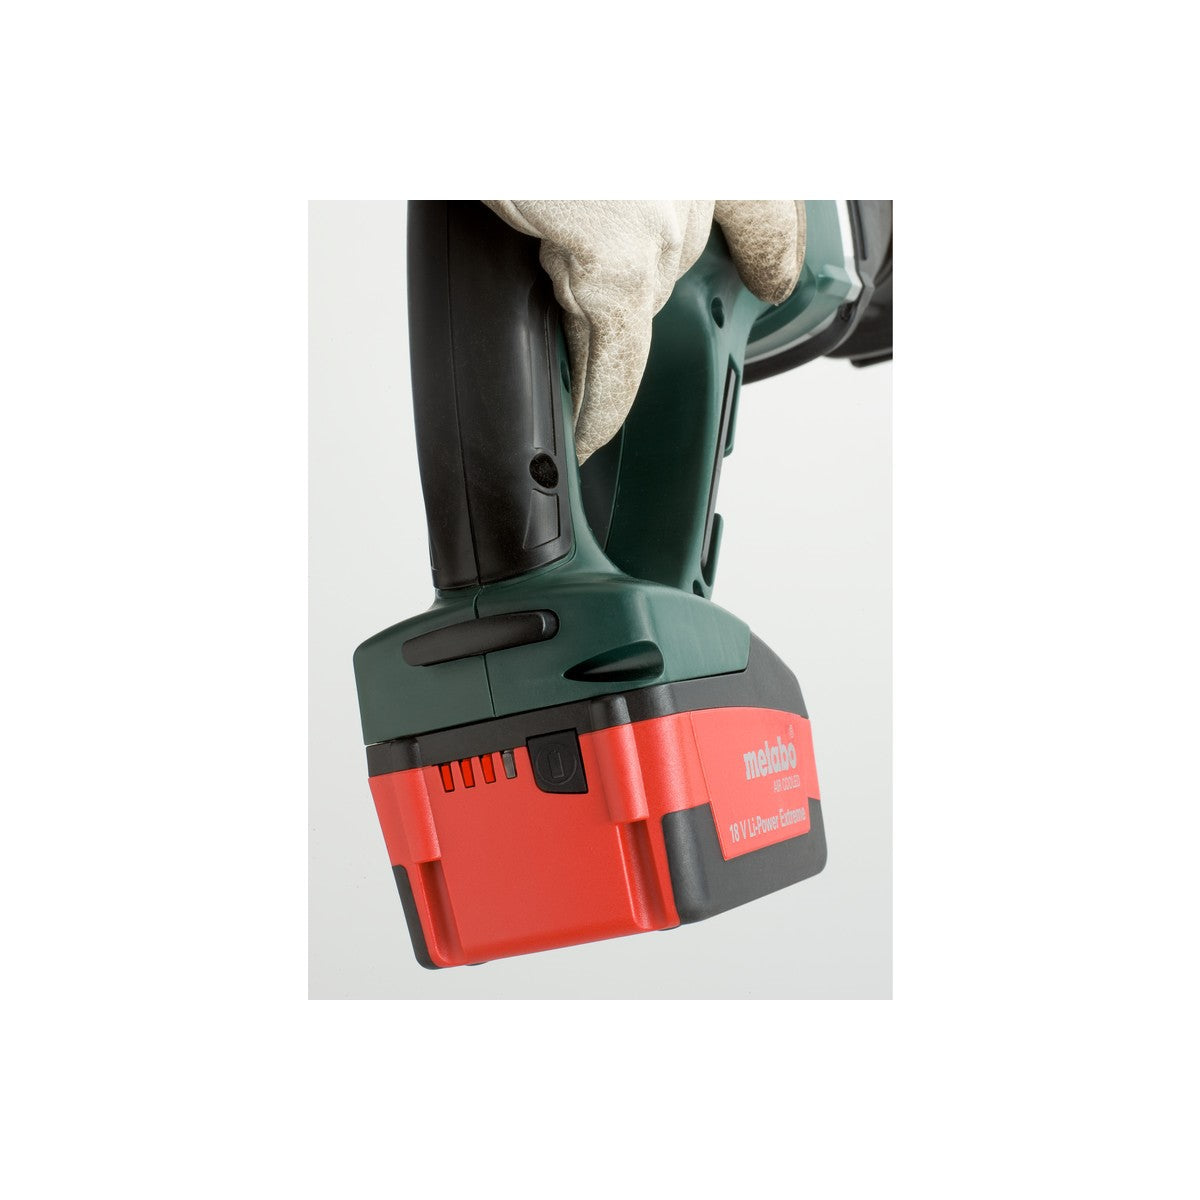 Metabo (602269850) ASE 18V LTX Cordless Reciprocating Saw Bare Tool image 1 of 4 image 2 of 4 image 3 of 4